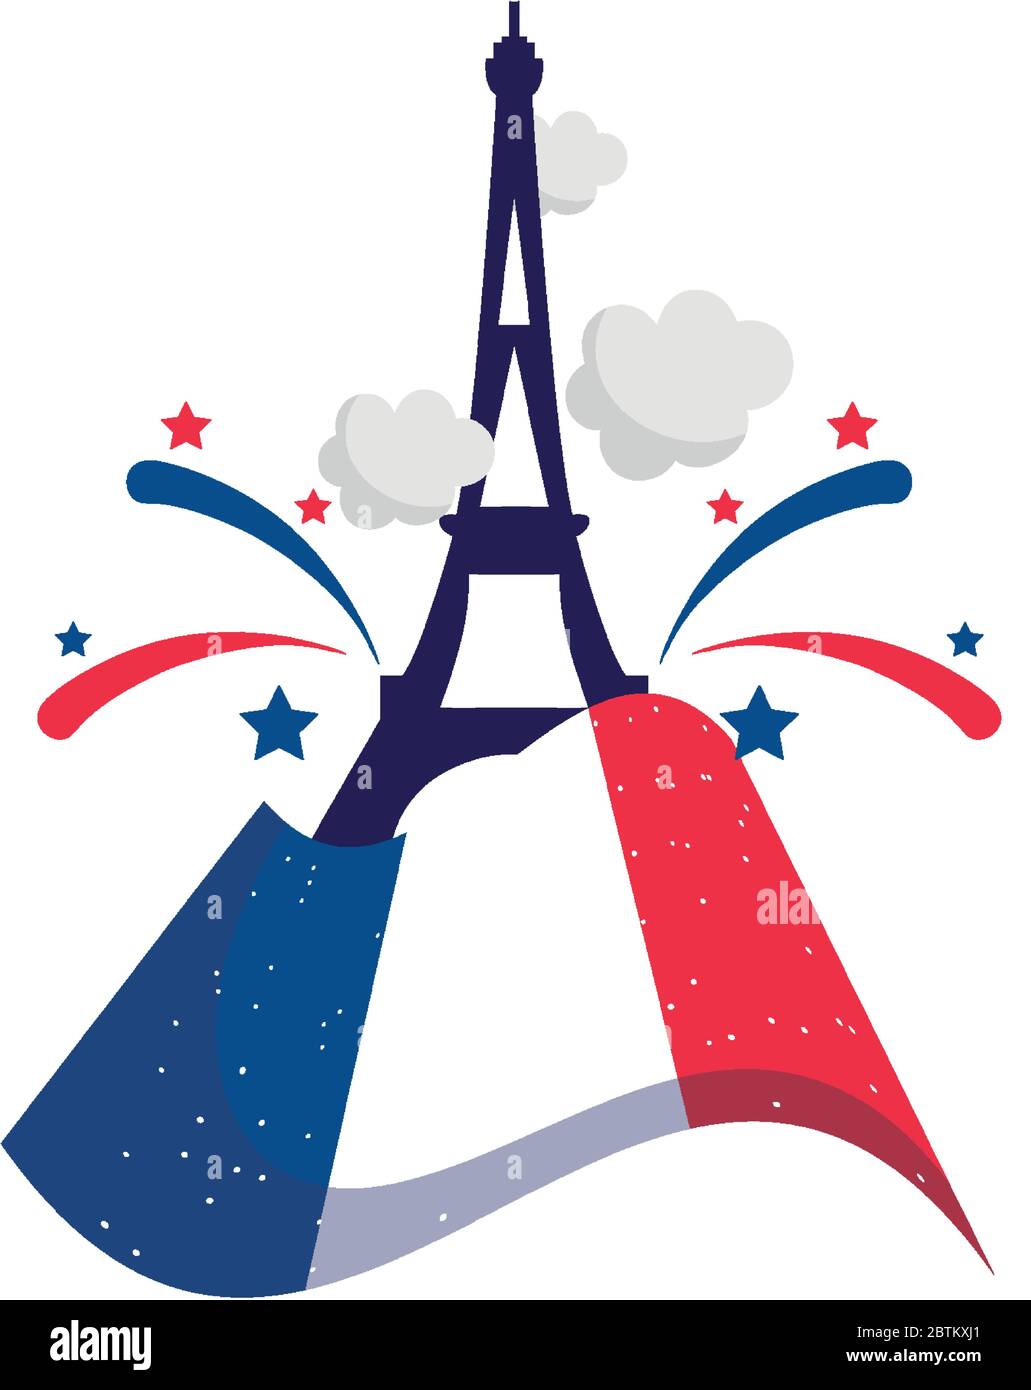 france eiffel tower with flag design, Happy bastille day and french theme Vector illustration Stock Vector